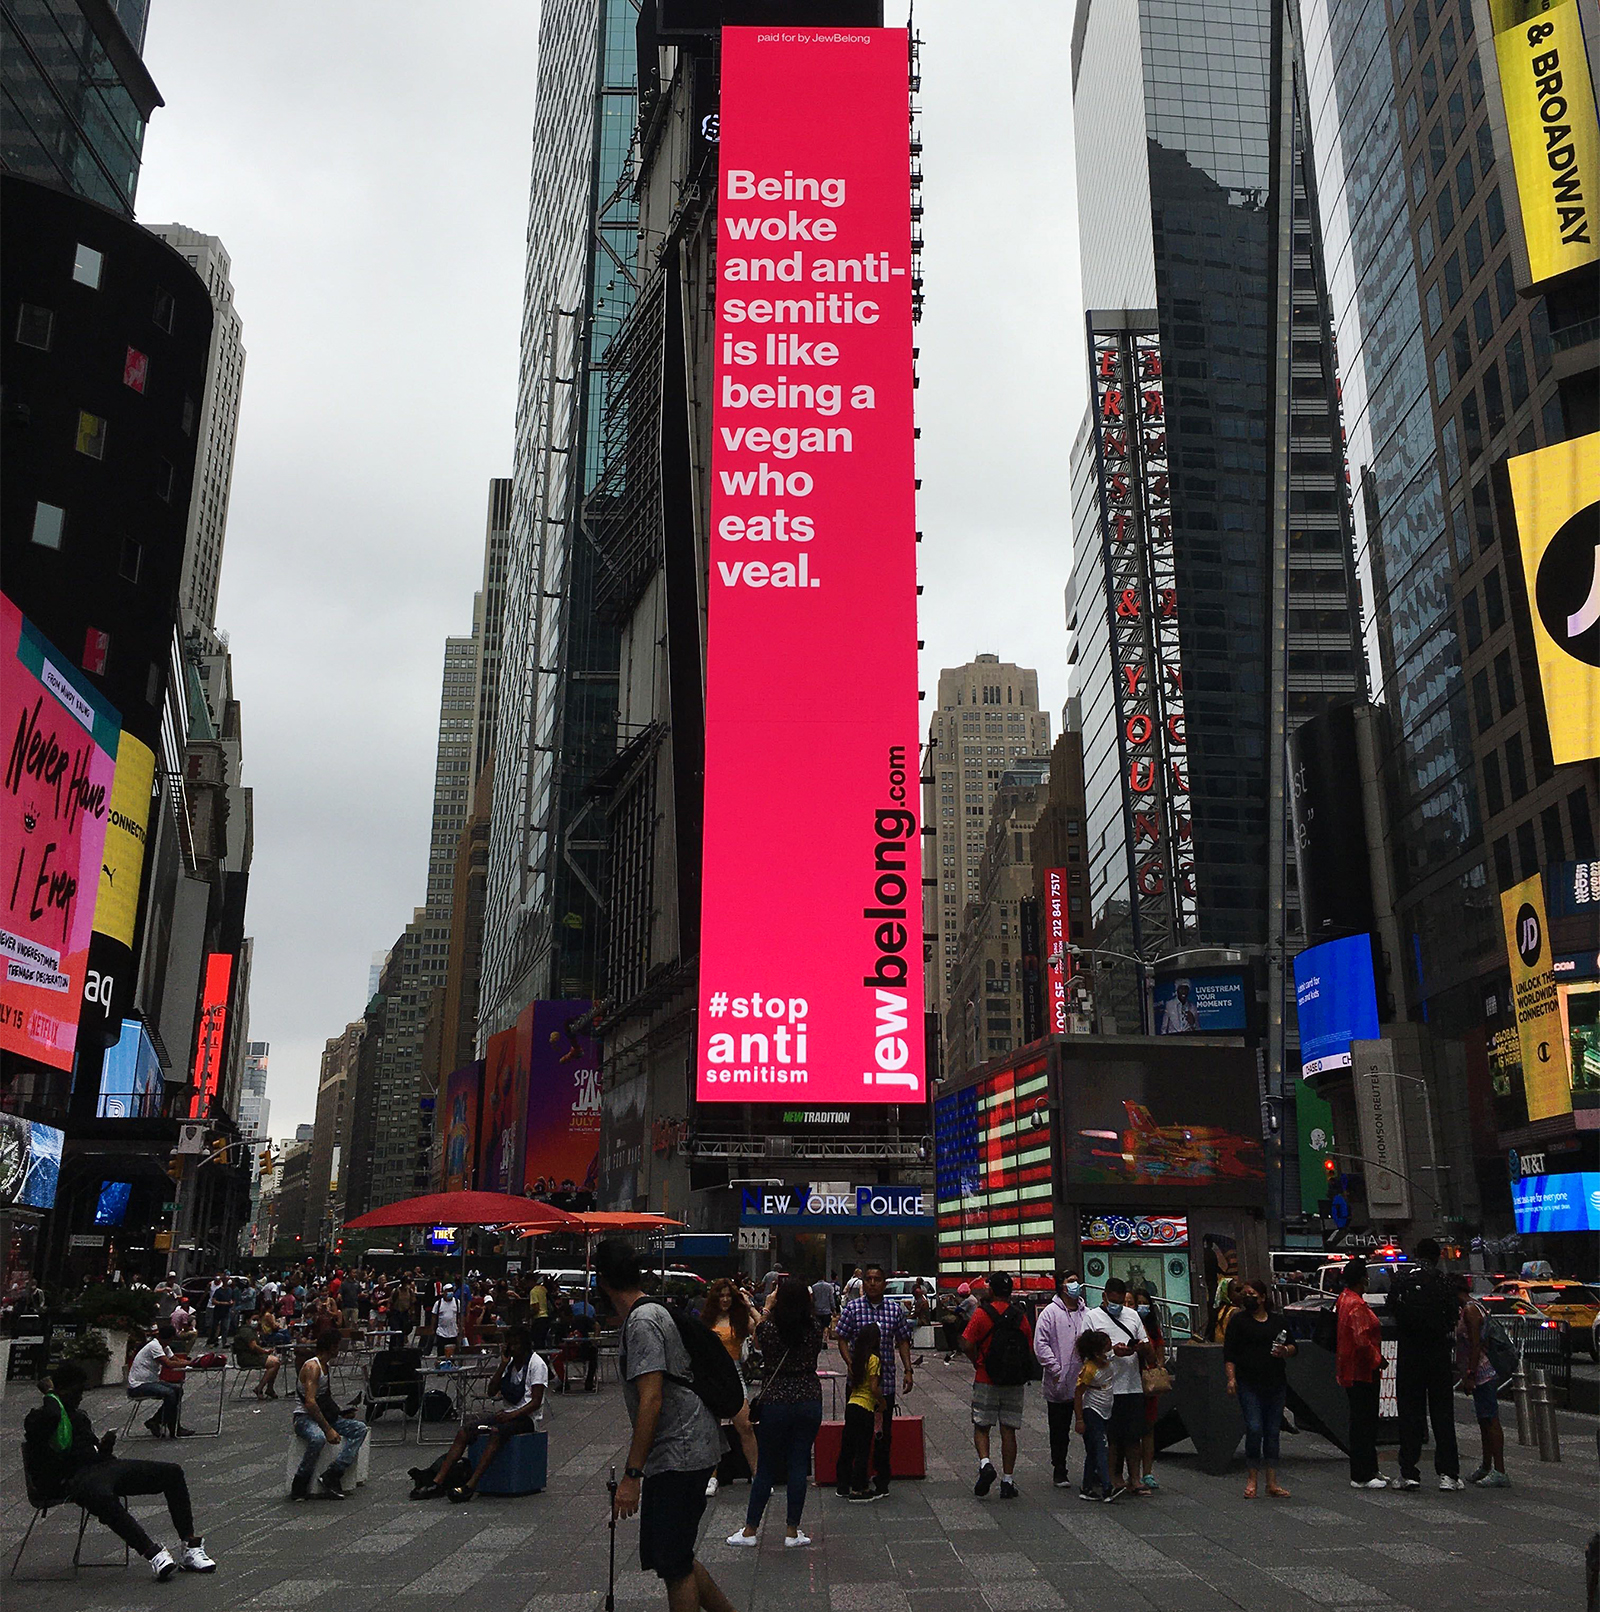 A large billboard displays a message against antisemitism from JewBelong in Times Square, Monday, July 12, 2021, in New York City. RNS photo by Renée Roden